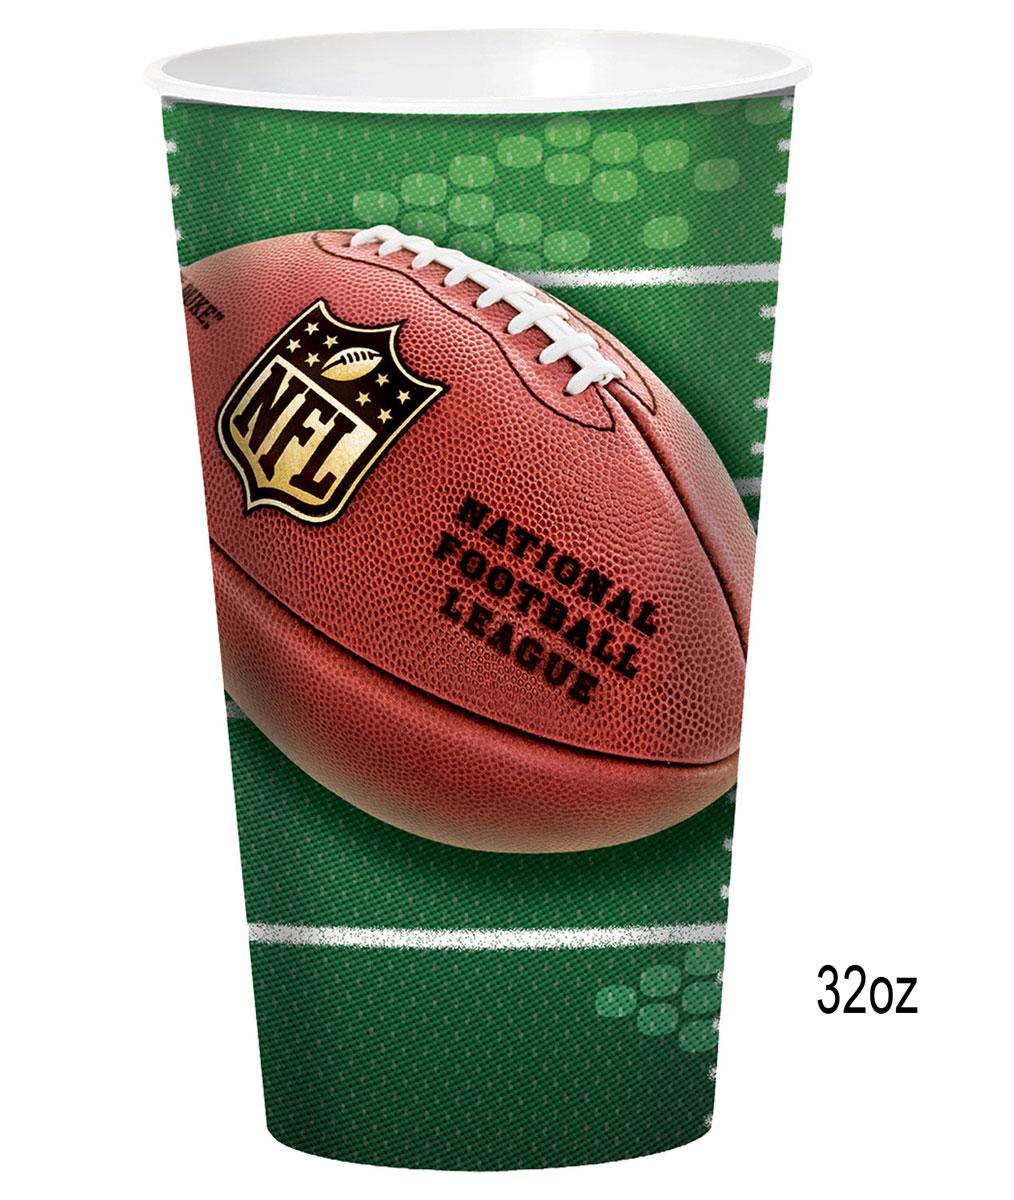 American Football official NFL Stadium Cup 32oz/909ml by Amscan 421214 available in the UK here at Karnival Costumes onlien party shop